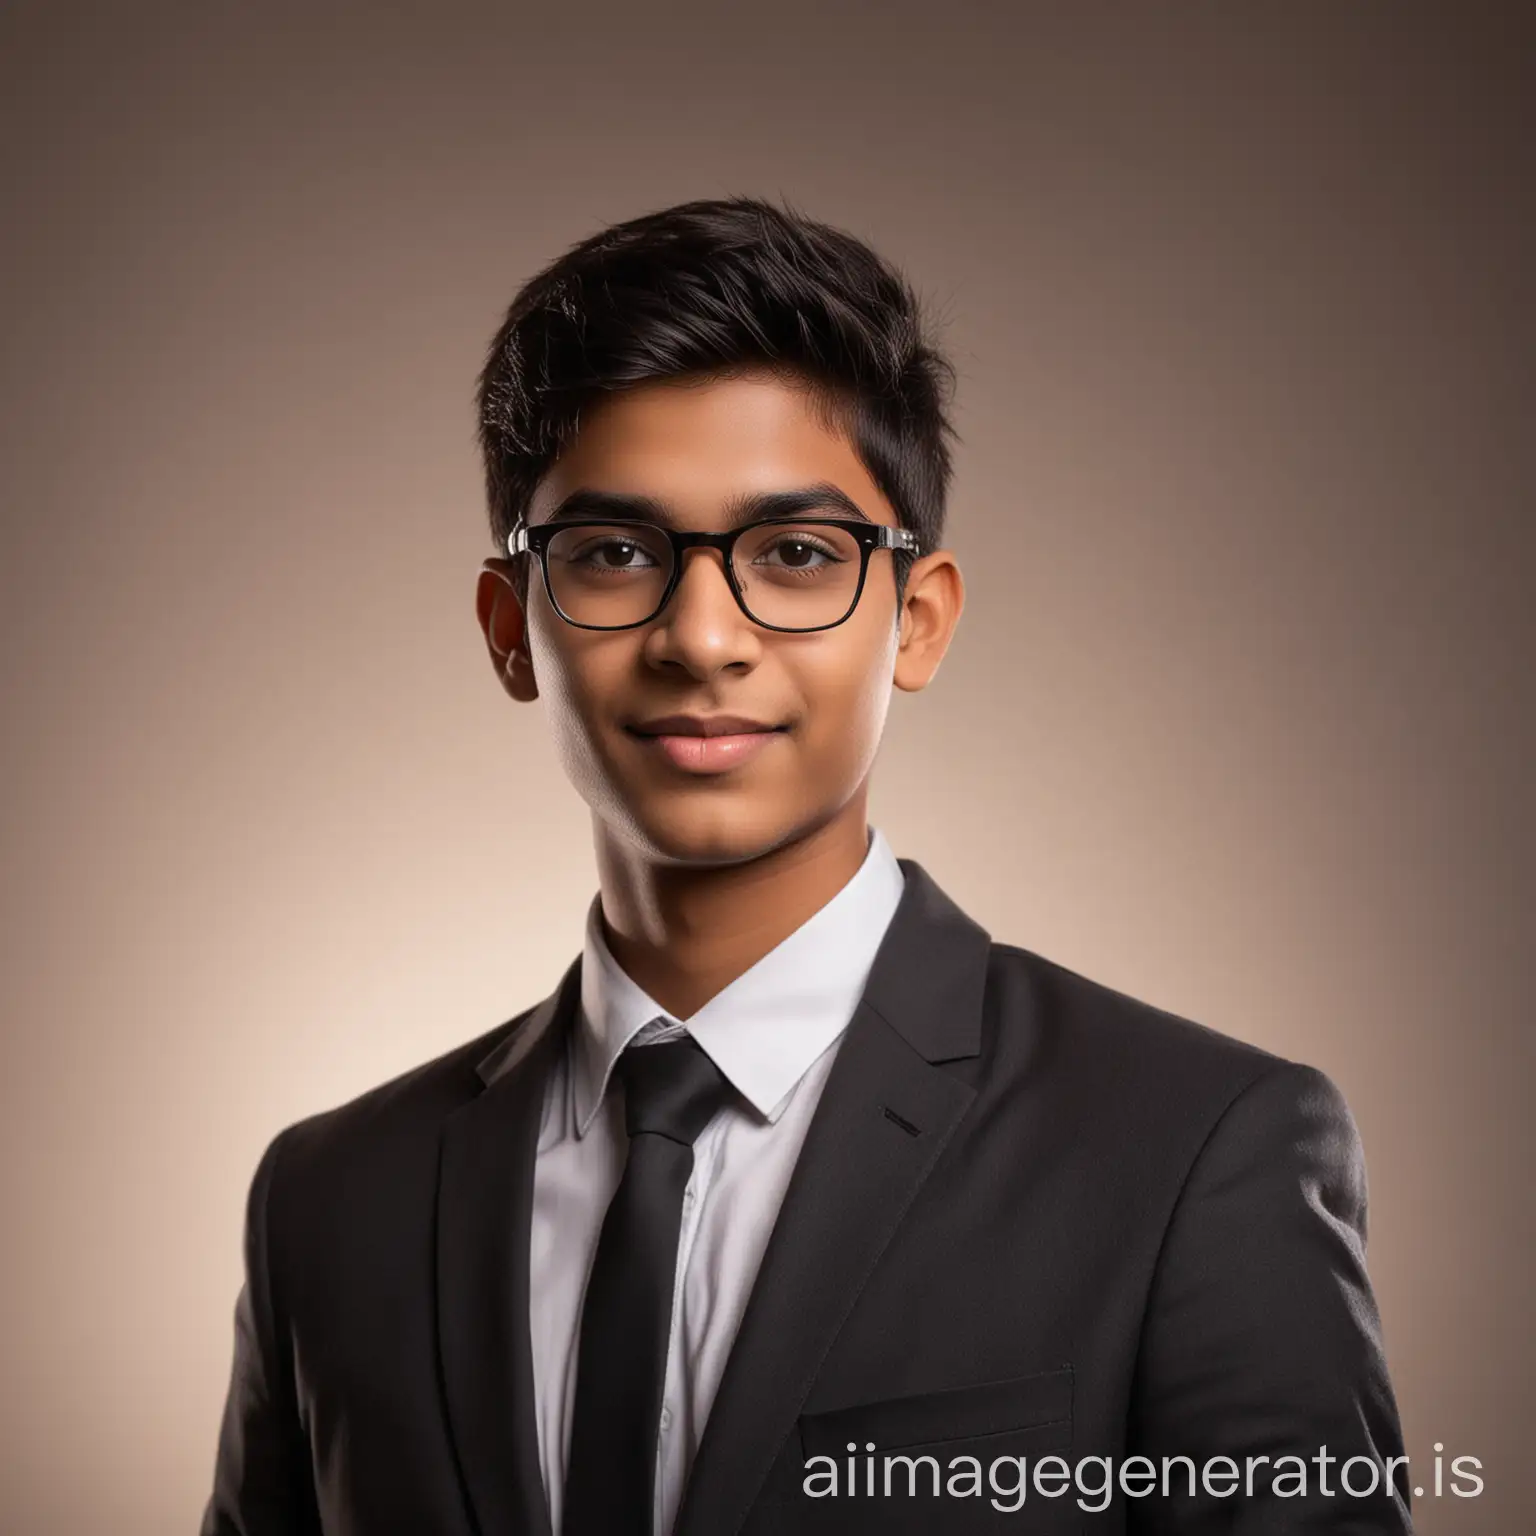 18 year old indian boy With fair skin Wearing spectacles and narrow body Posing for a linkedin picture in formals formed light in background